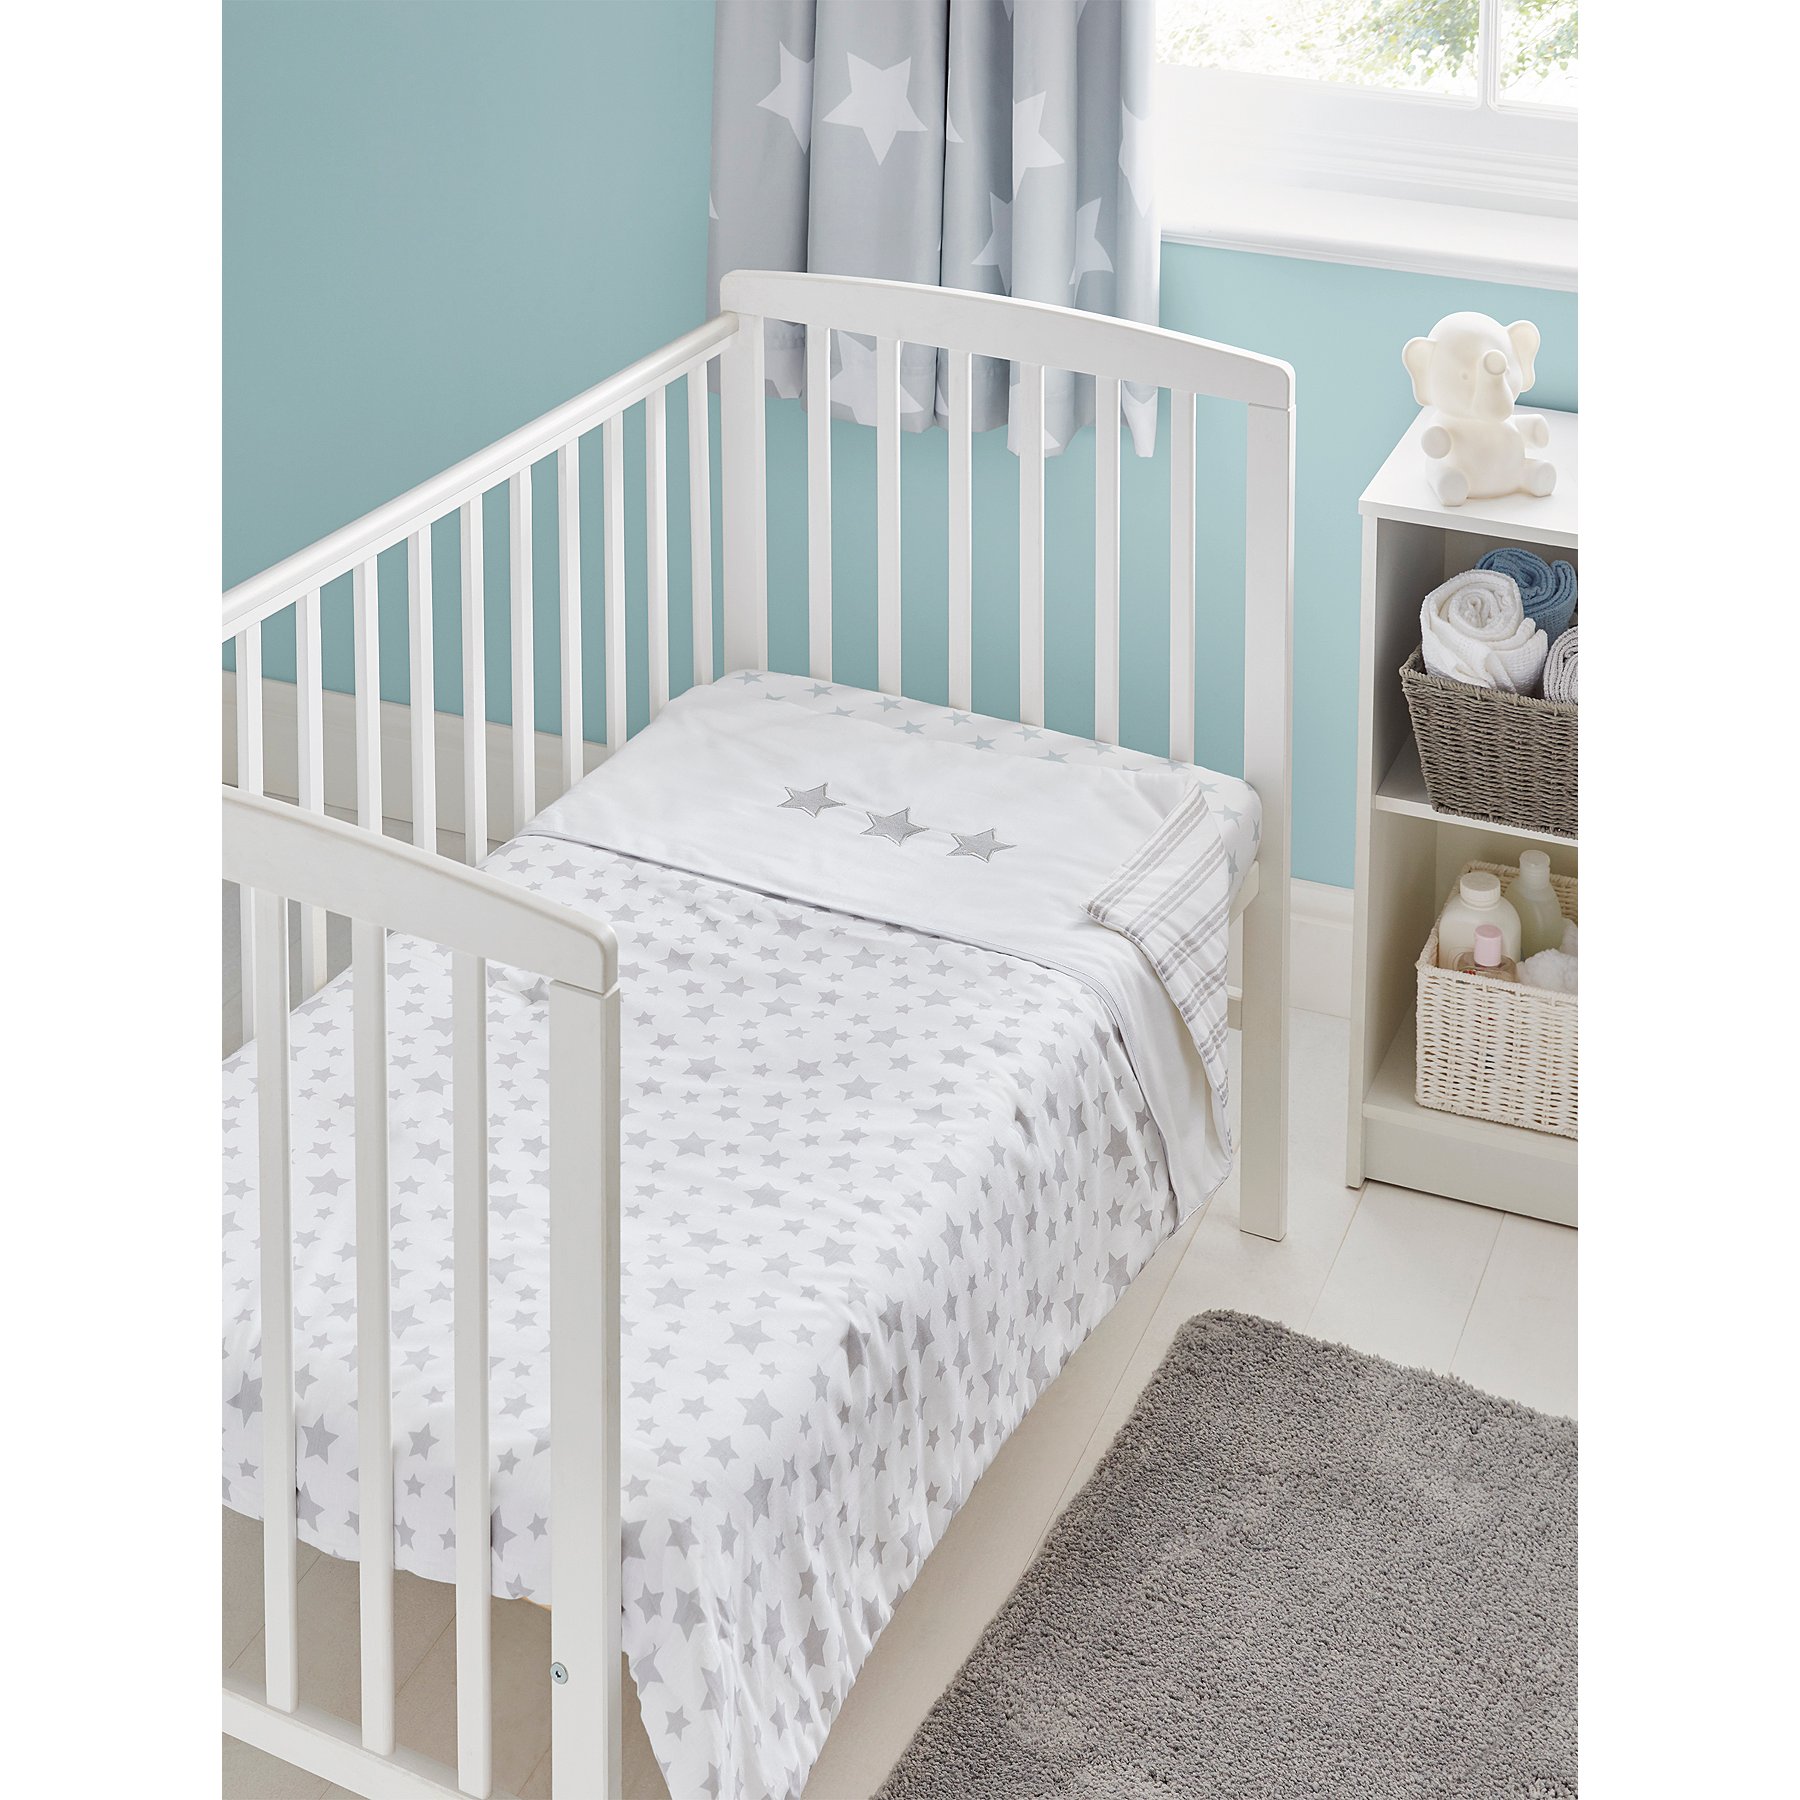 Star Print Cot And Cot Reversible Bed Quilt Baby George